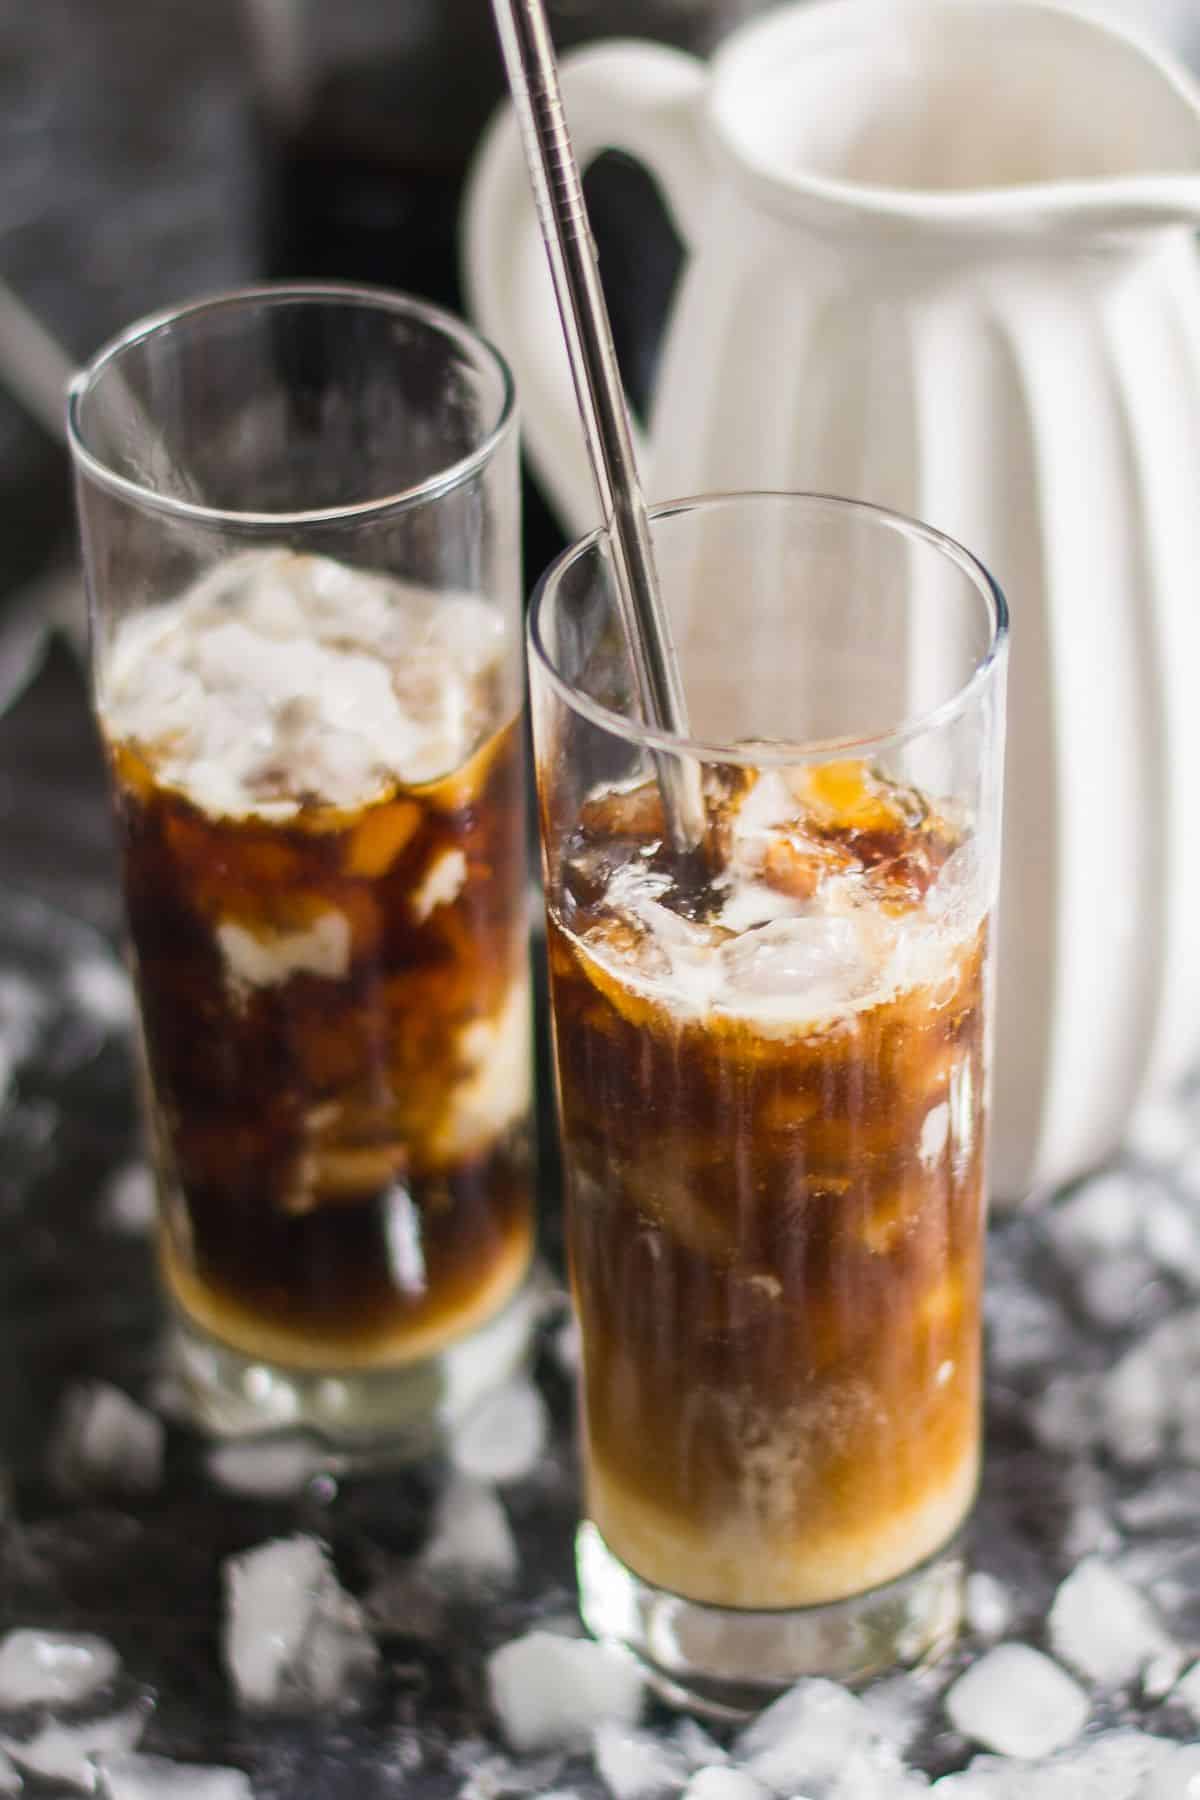 Two glasses filled with coffee and ice.